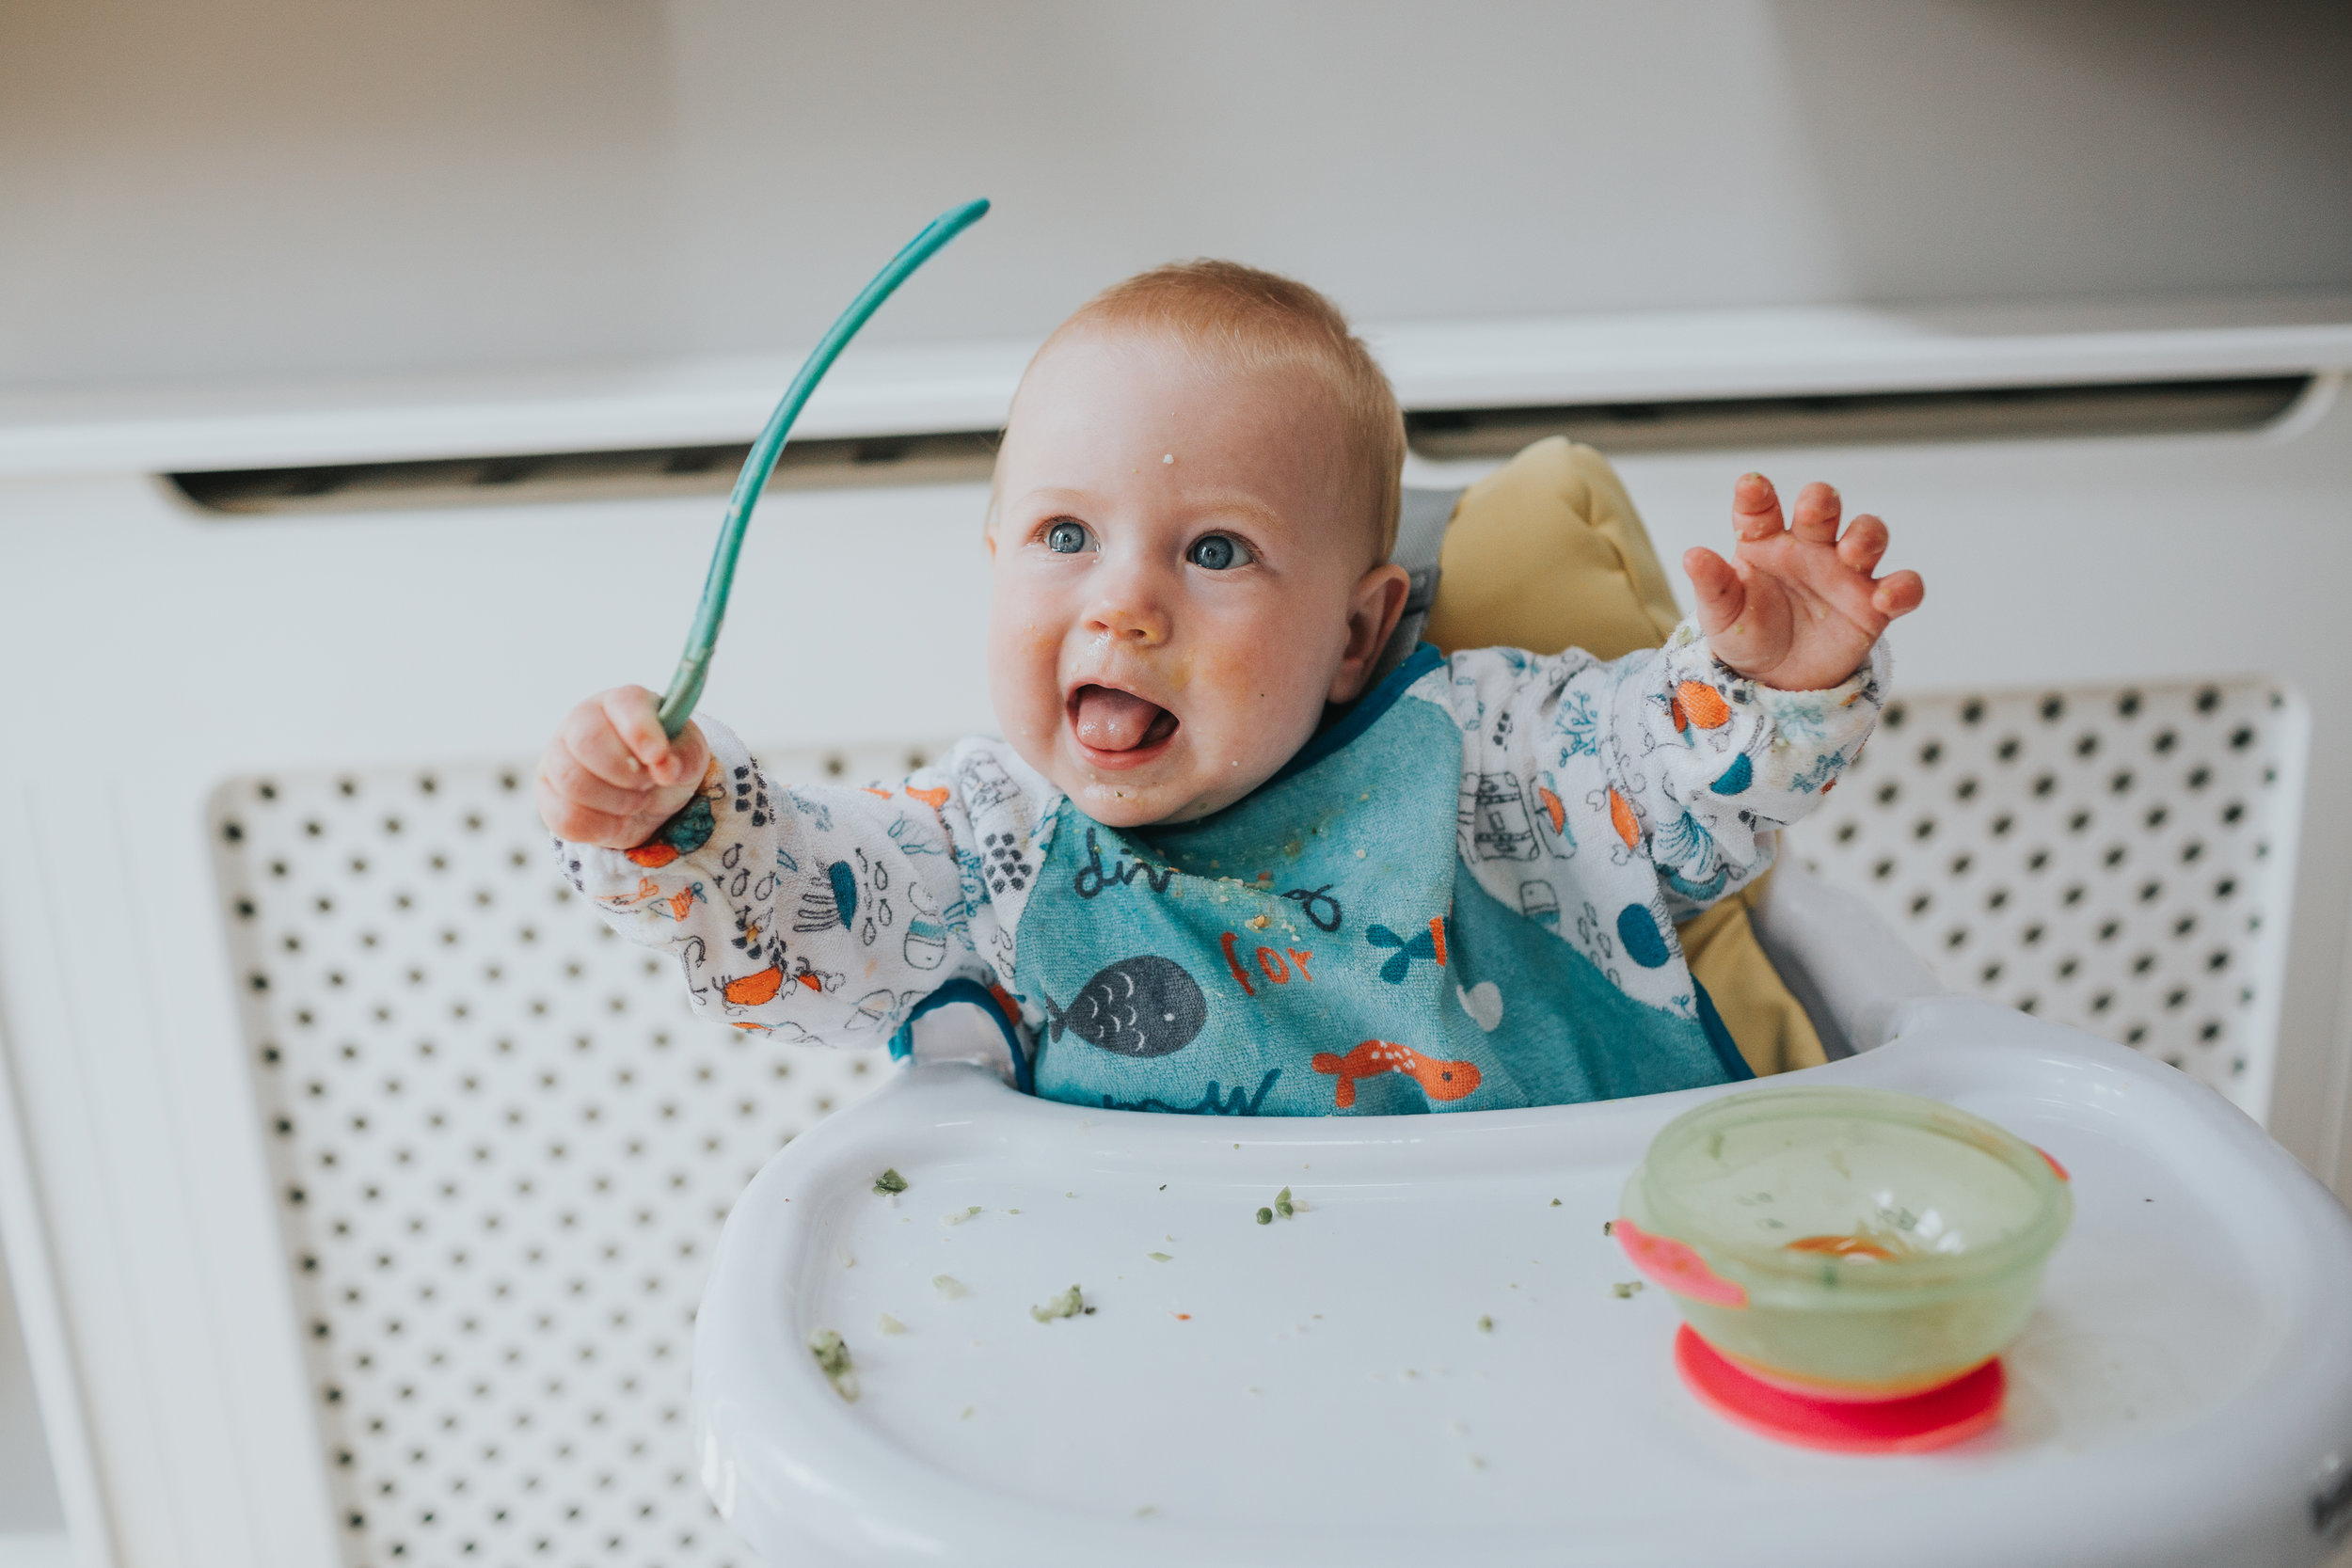 Baby pulls tongue out and waves his spoon in the air. 